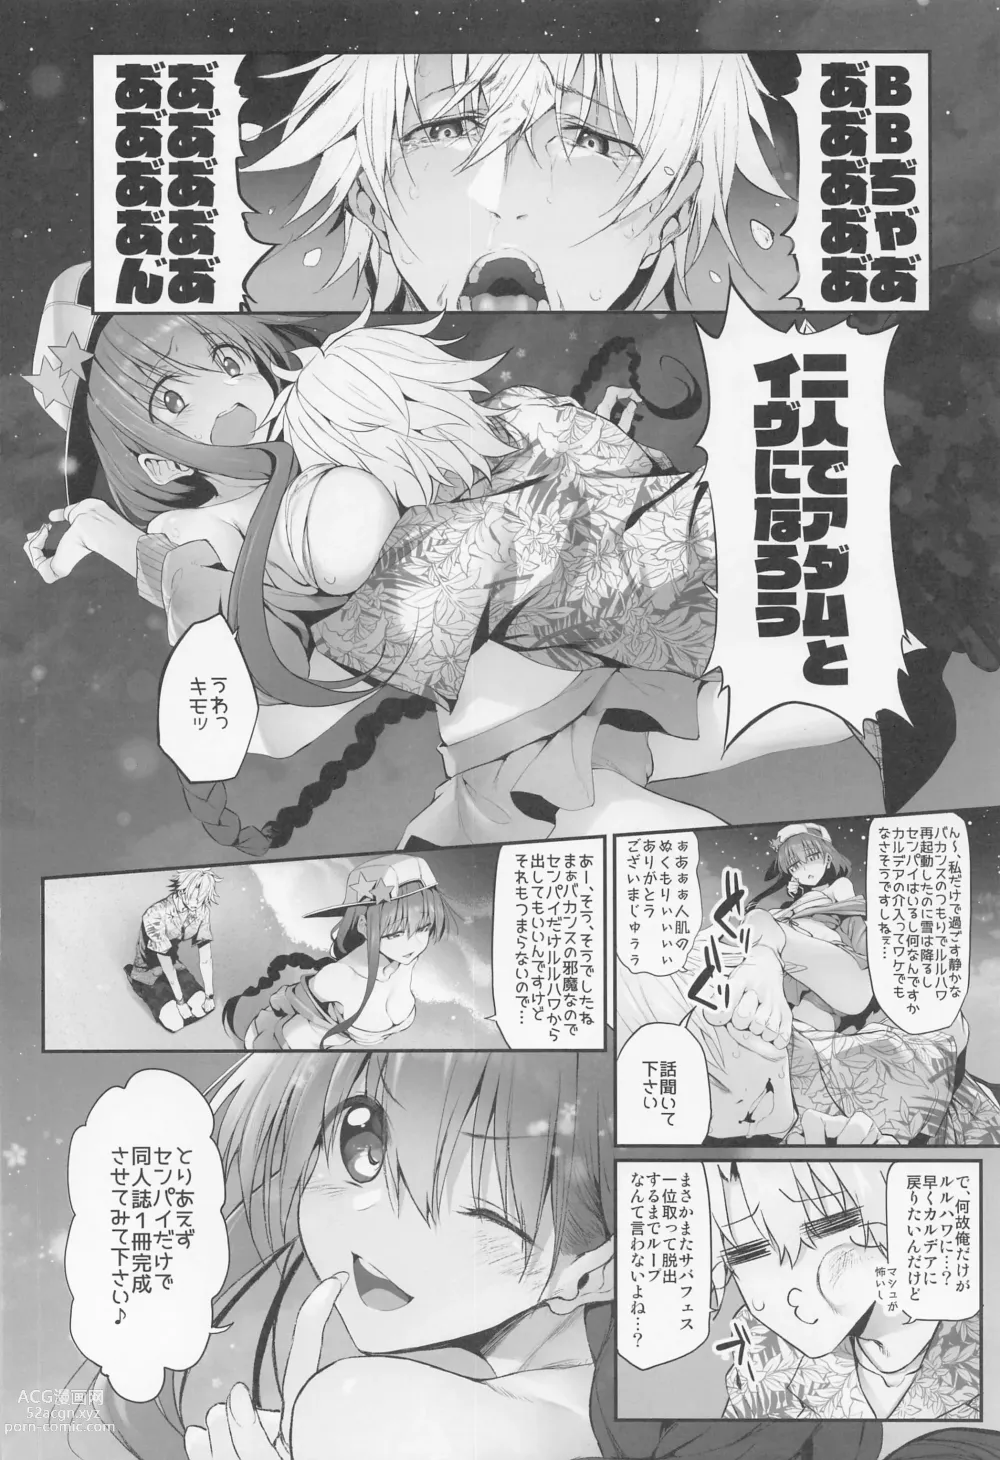 Page 6 of doujinshi Marked-girls Collection Vol. 6